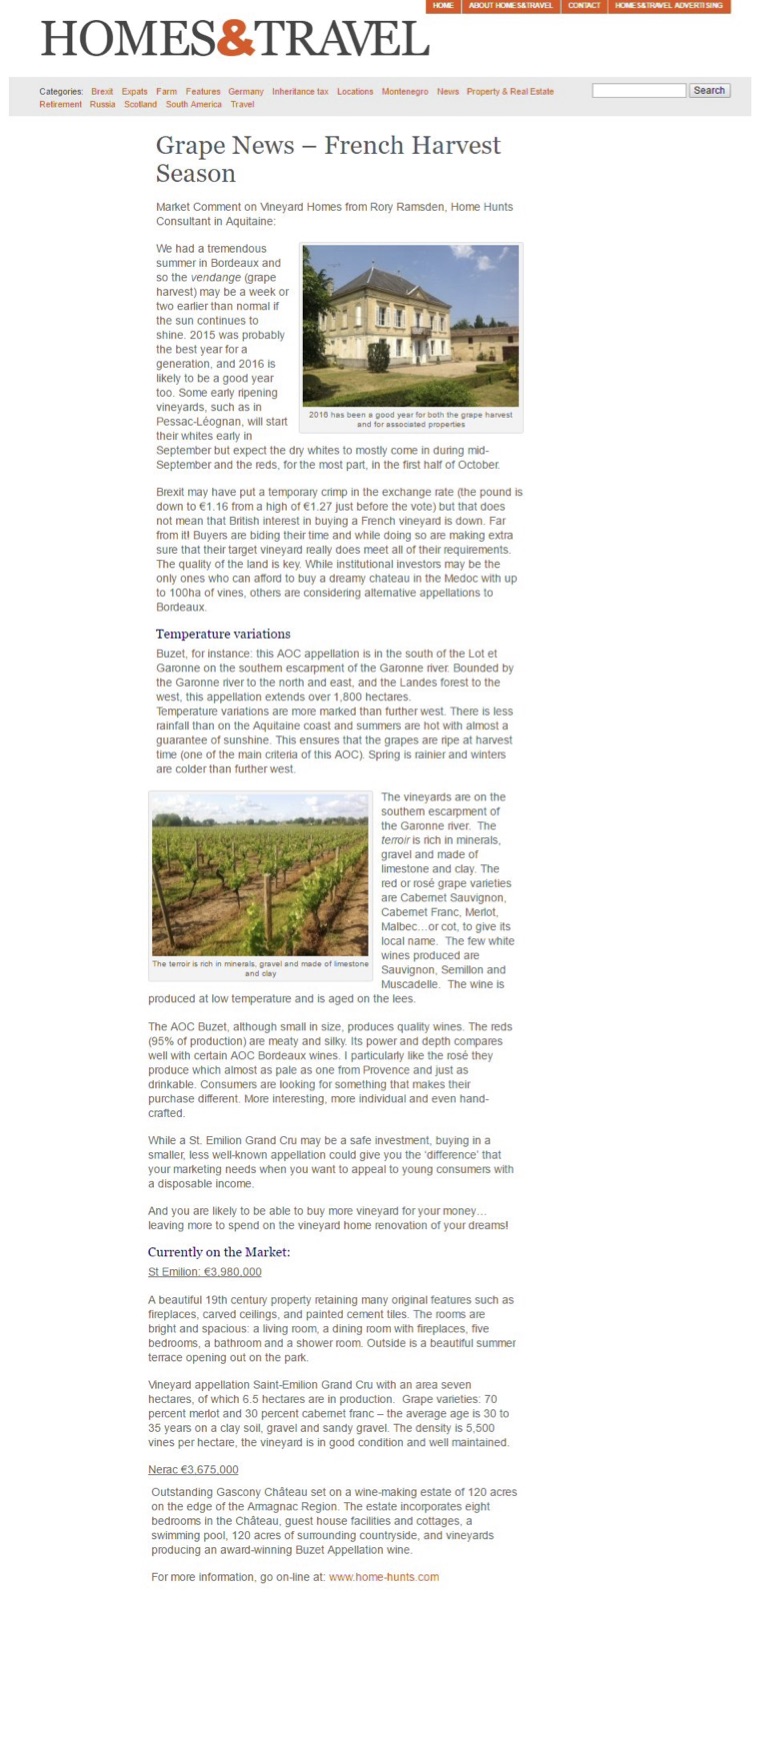 Homes and Travel – News about the French vineyards market